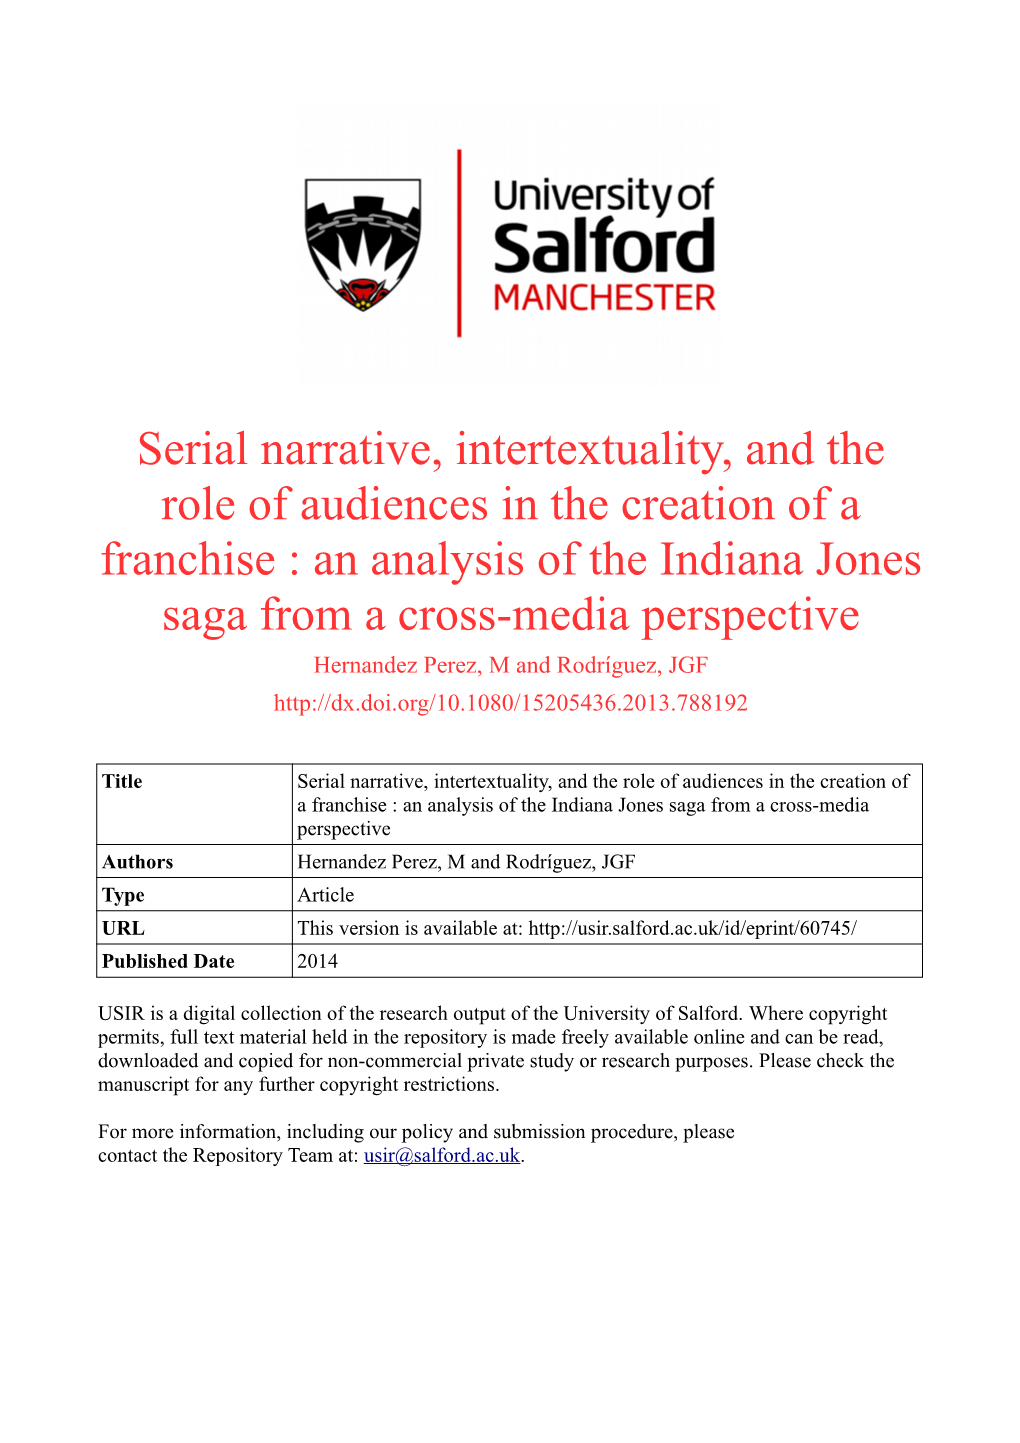 An Analysis of the Indiana Jones Saga from a Cross-Media Perspective Hernandez Perez, M and Rodríguez, JGF